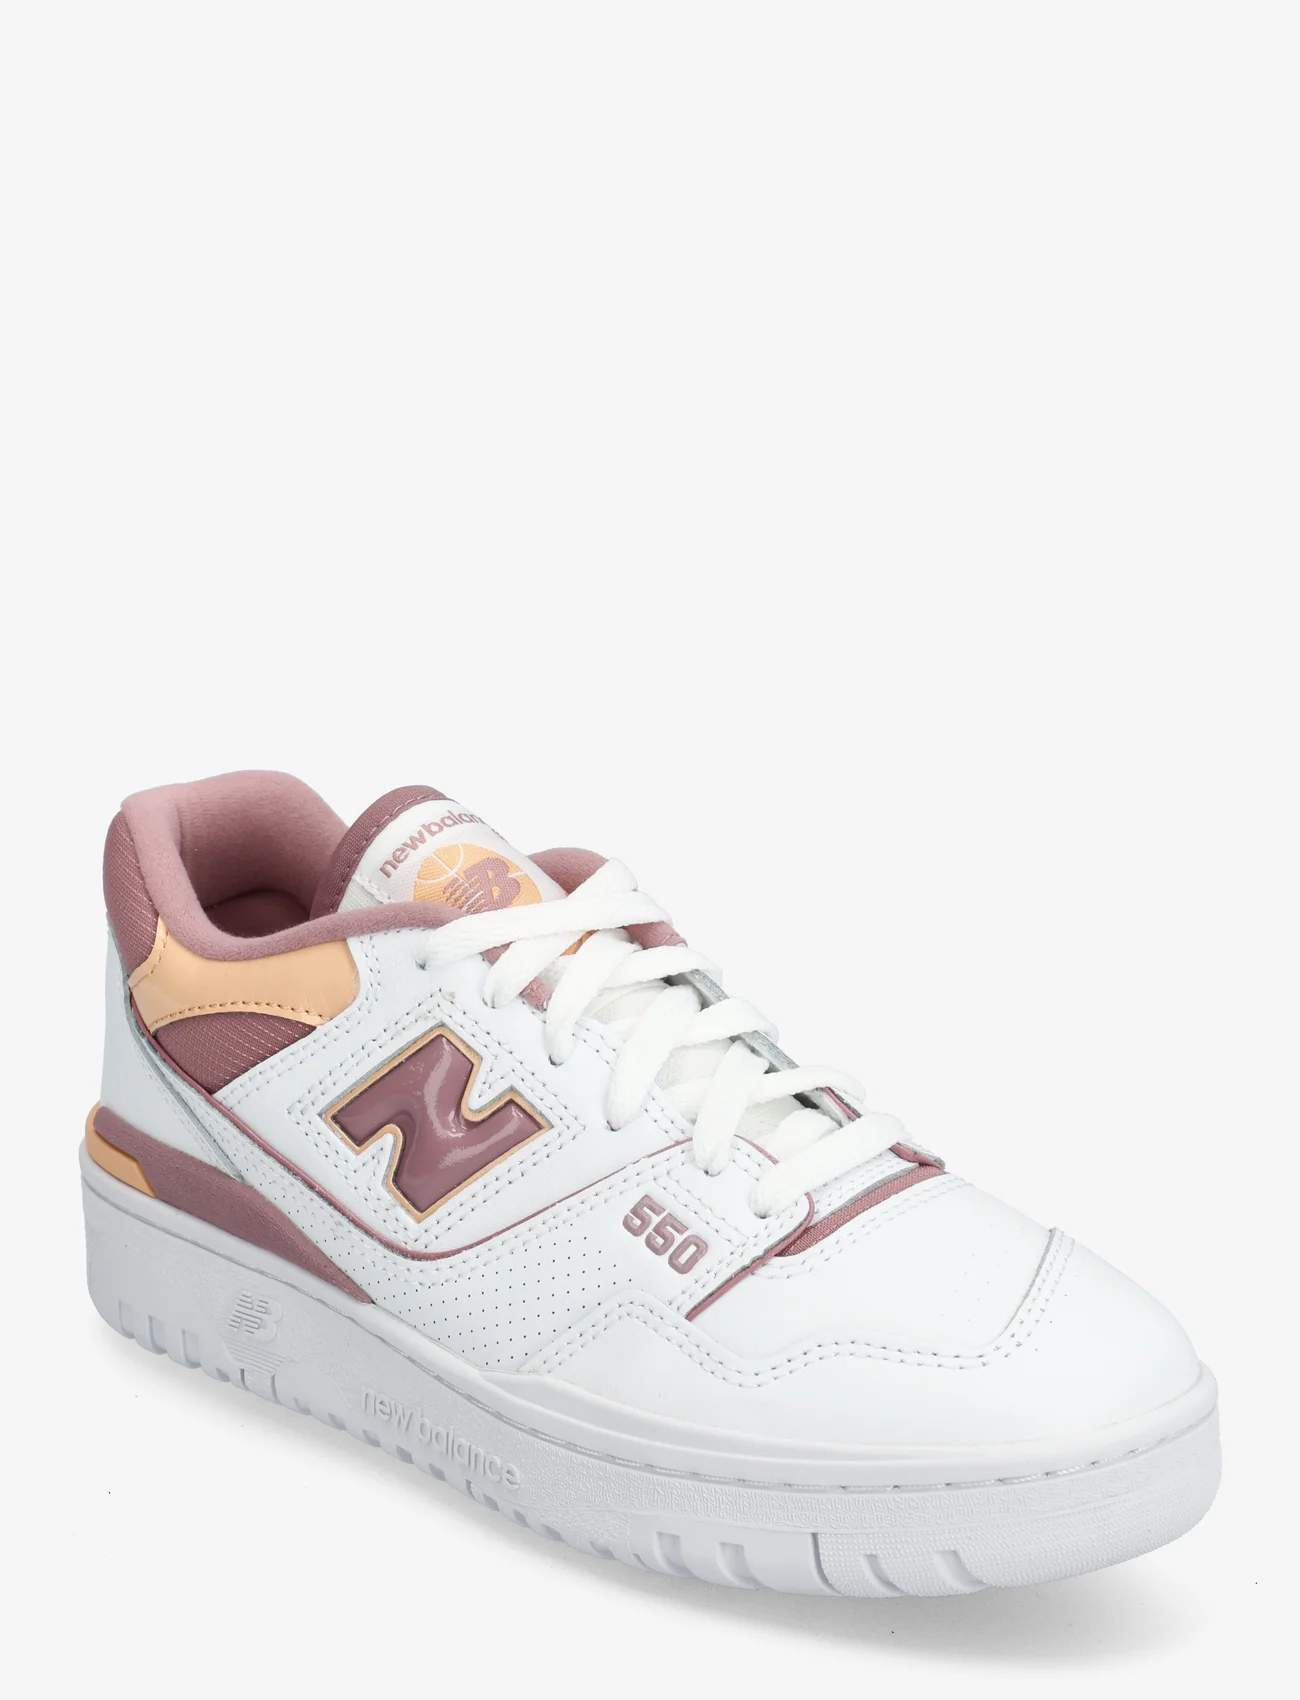 New Balance - New Balance BBW550 - low top sneakers - white - 0